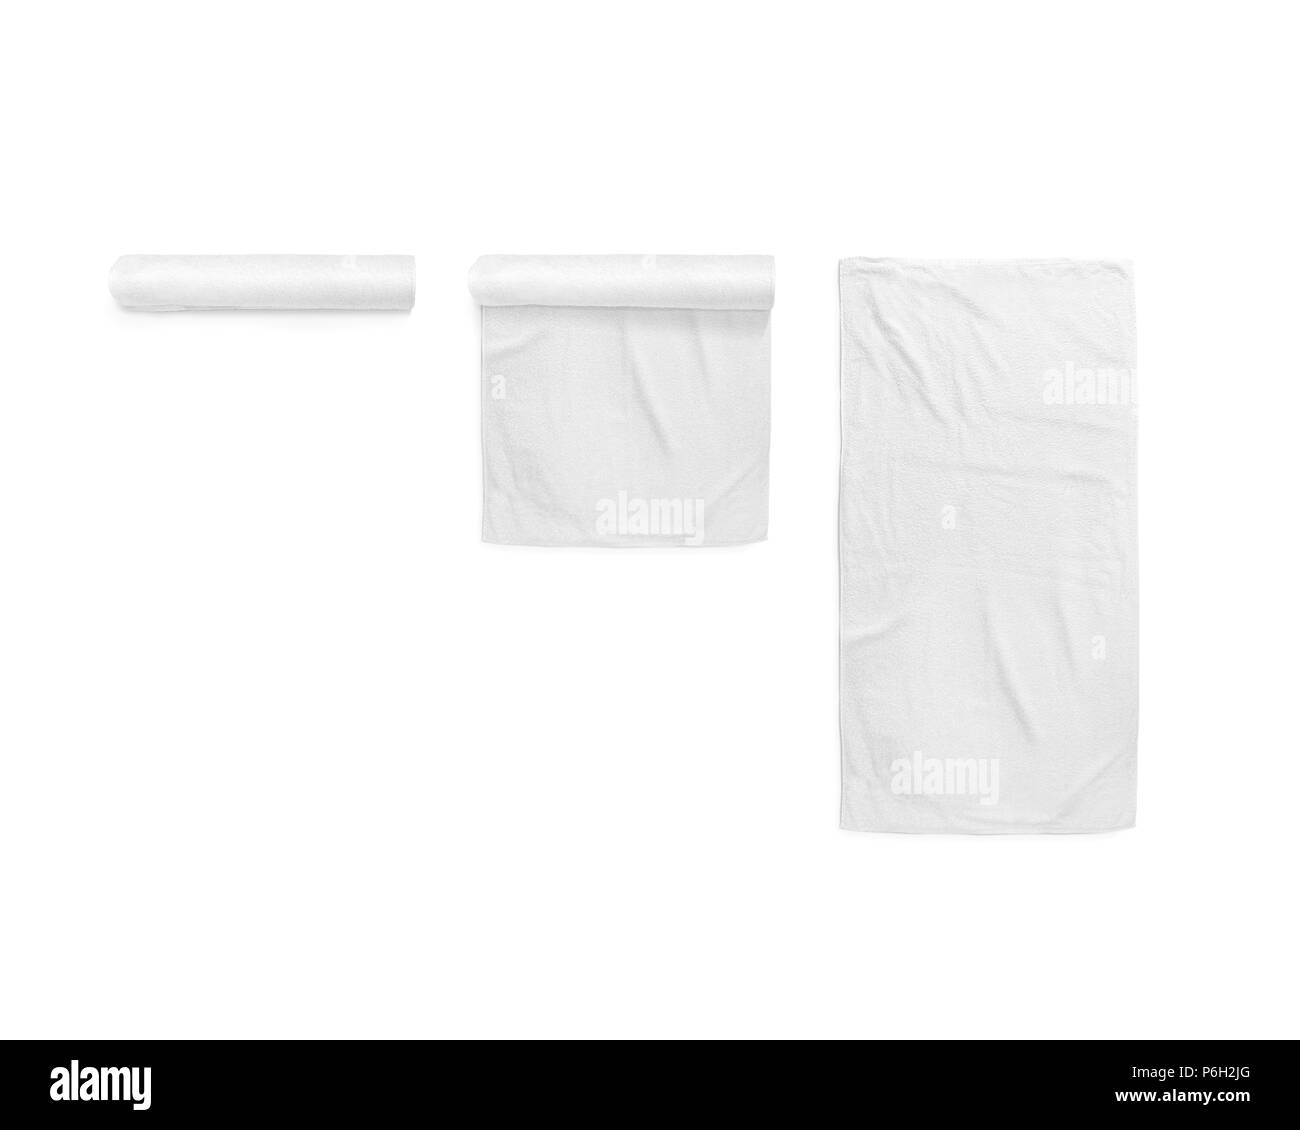 Download Black White Soft Beach Towel Mockup Set Clear Folded And Unfolded Wiper Mock Up Laying On The Floor Shaggy Fur Bath Textured Jack Towel Top View Domestic Cloth Kitchen Overlay Template Wrapped Stock